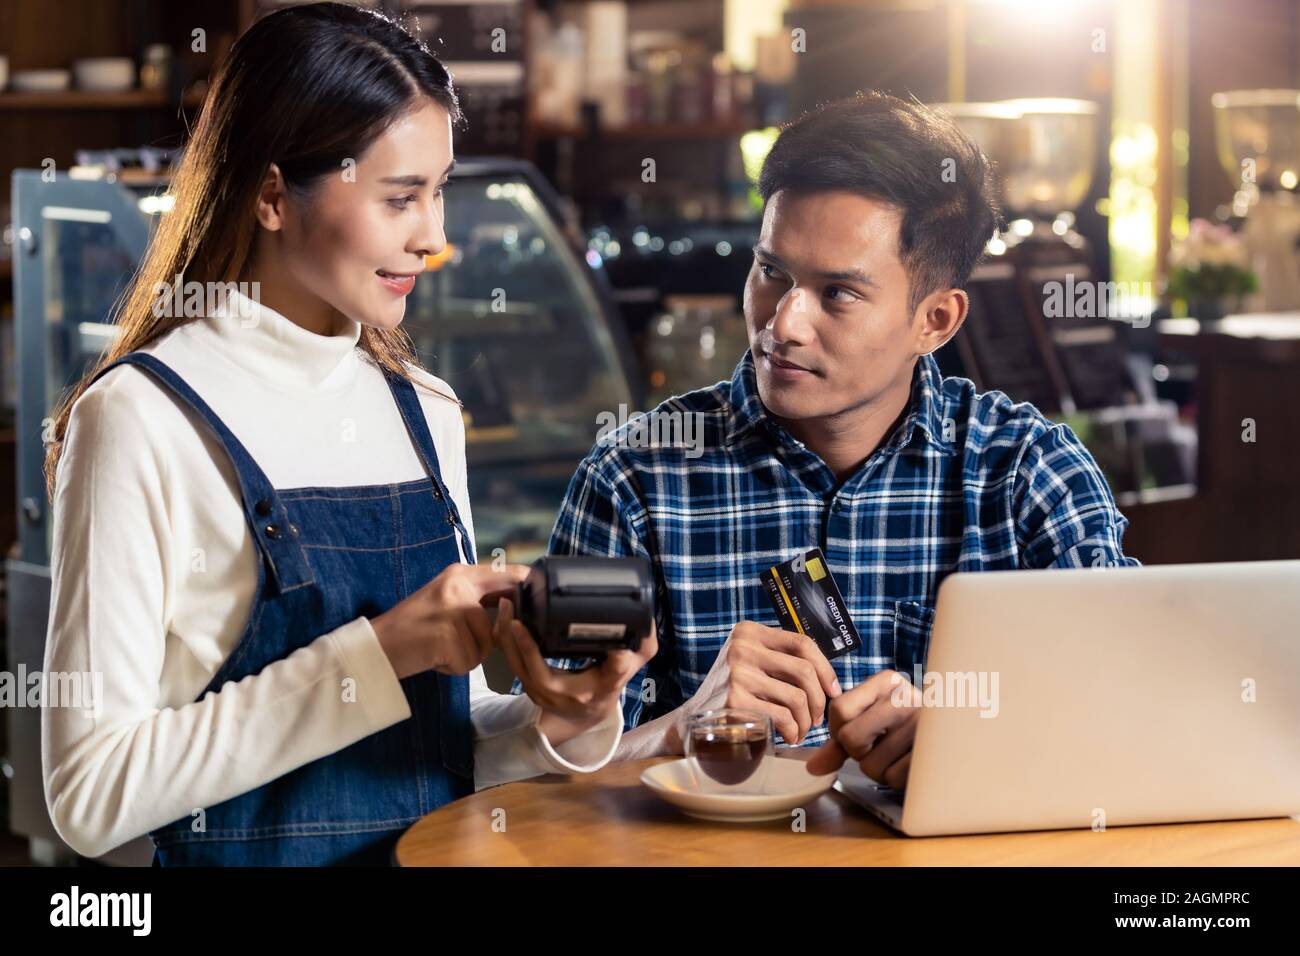 Asian customer using credit card with contactless nfs technology to pay a waitress for coffee purchase at table in cafe. Stock Photo